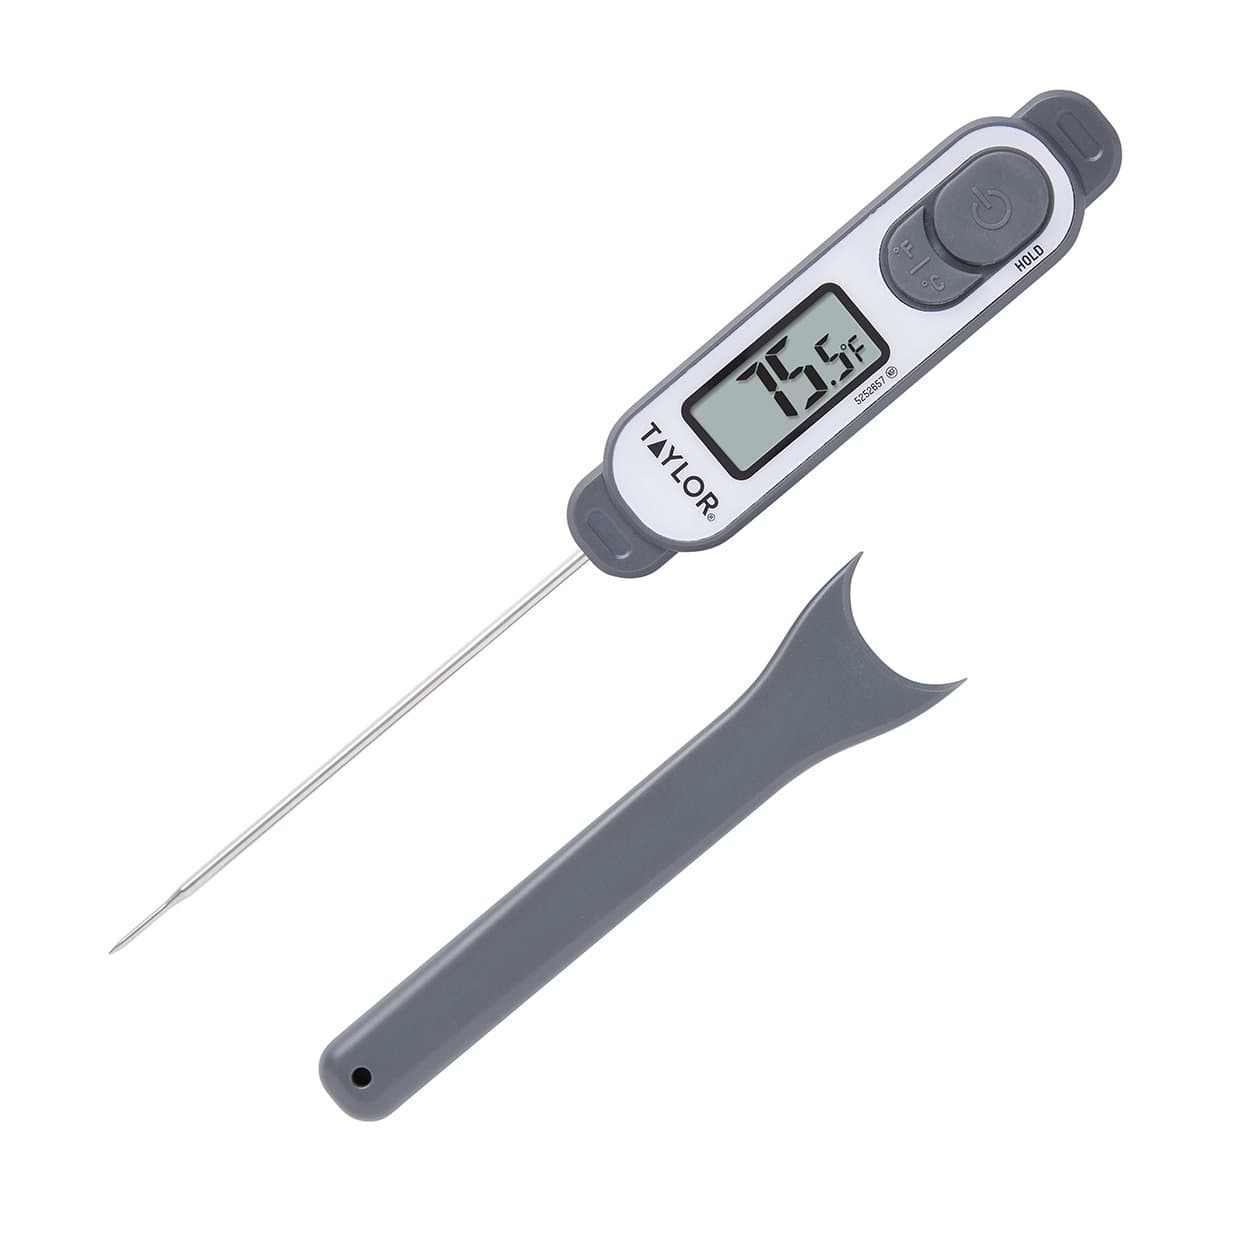 Brookstone Thermocouple Meat Thermometer RAPID RESPONSE DIGITAL MODEL BS200